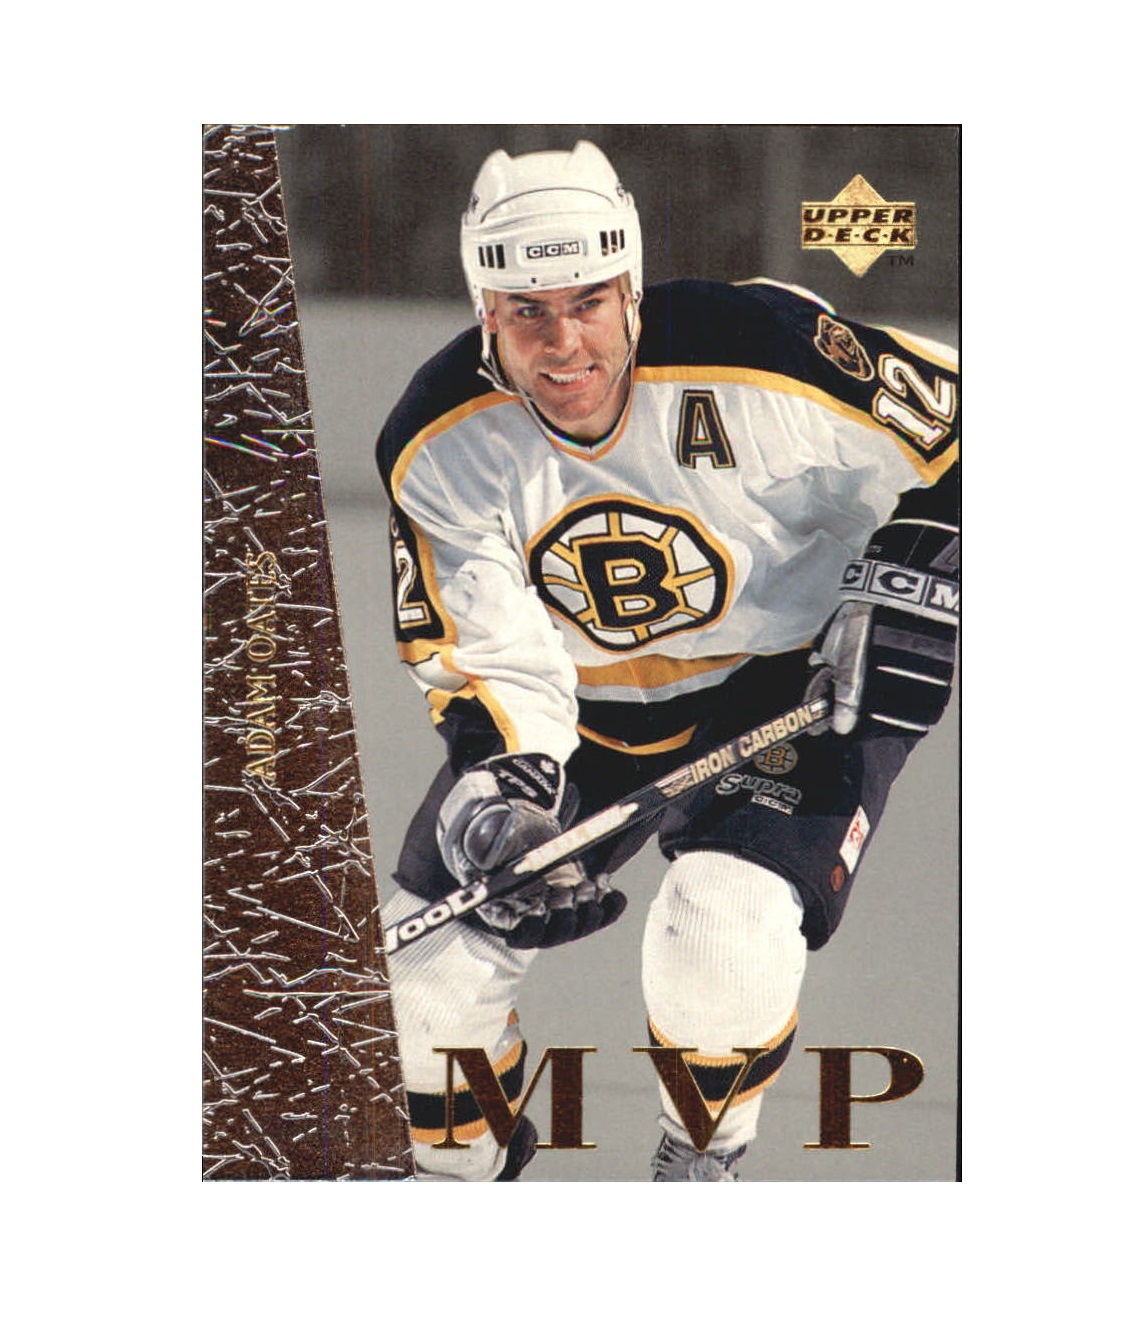 1996-97 Collector's Choice MVP #UD15 Adam Oates (10-X164-BRUINS)